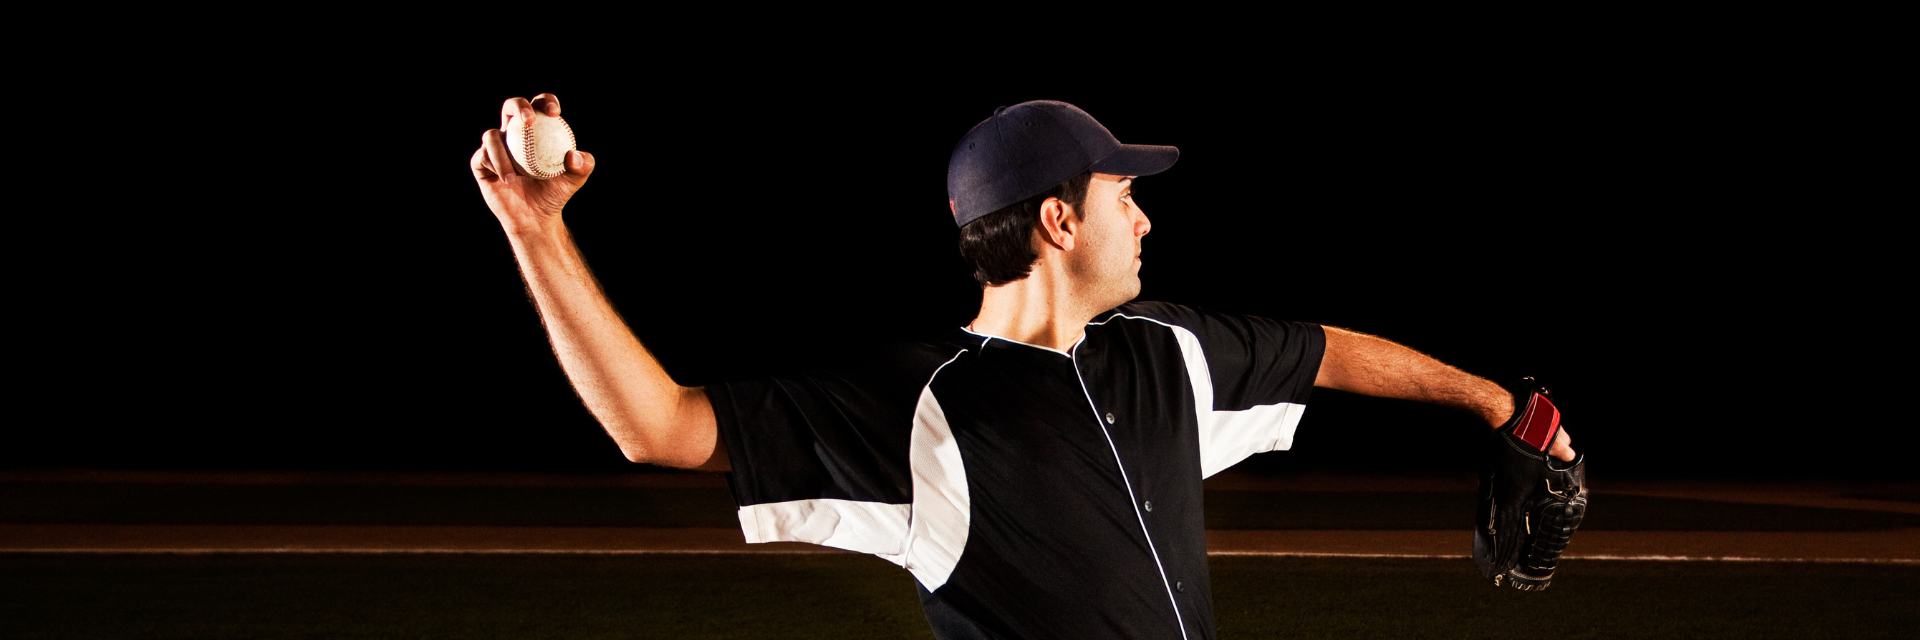 Baseball pitcher in mid-pitch